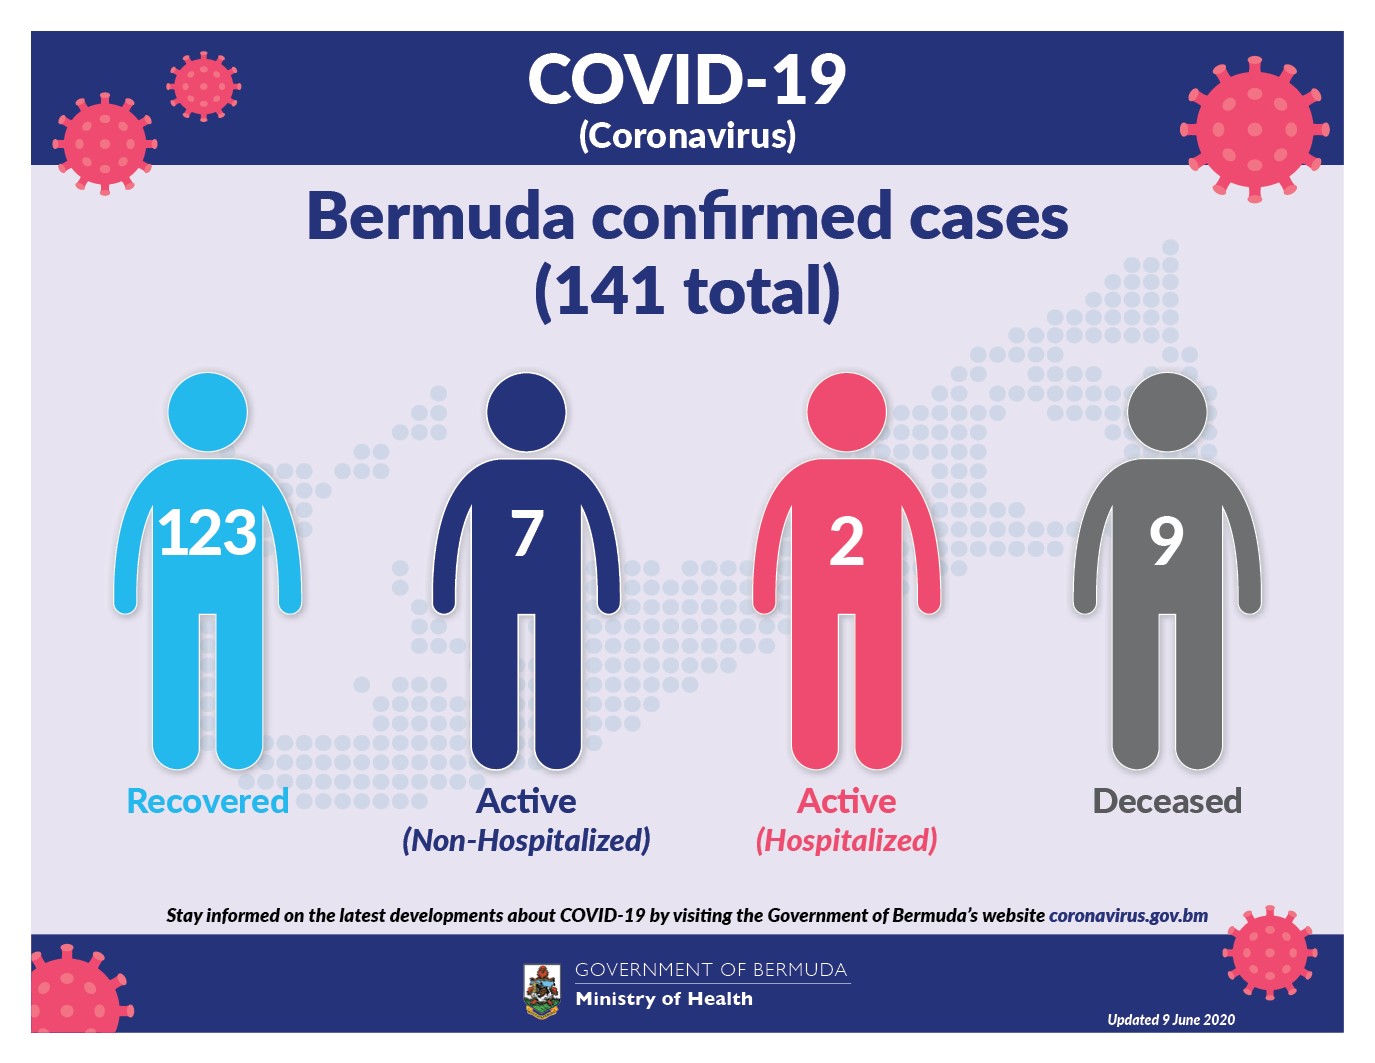 No new positive COVID cases in Bermuda; total cases remain at 141